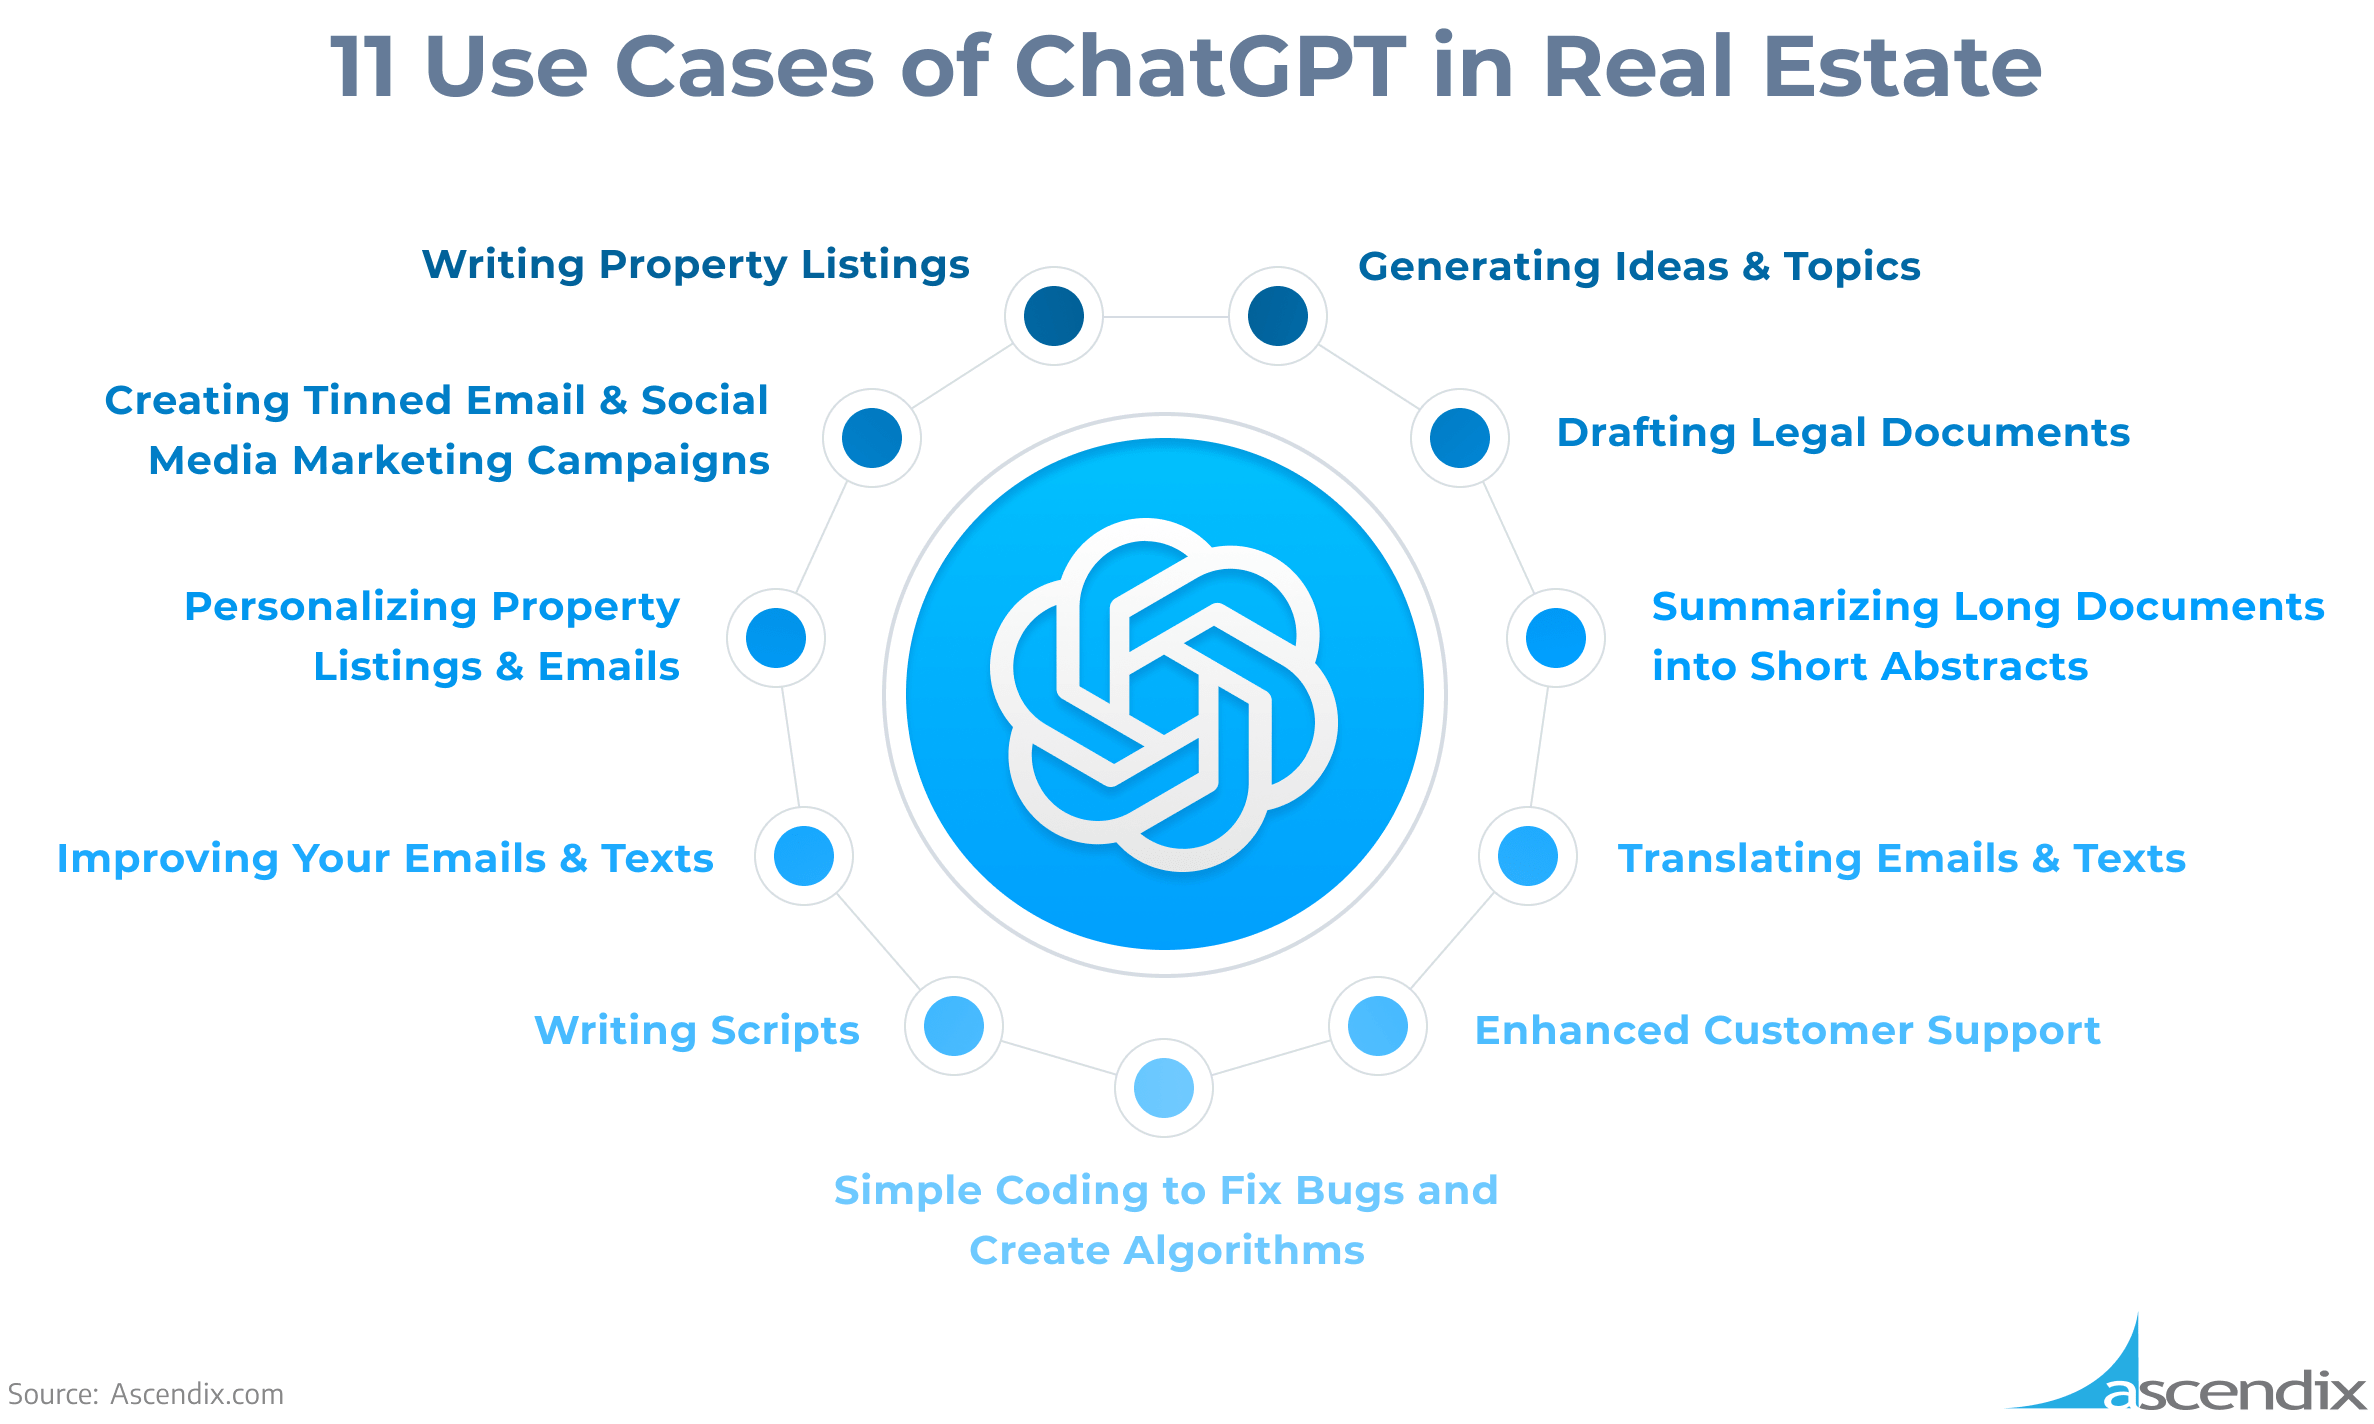 11 Use Cases of ChatGPT in Real Estate